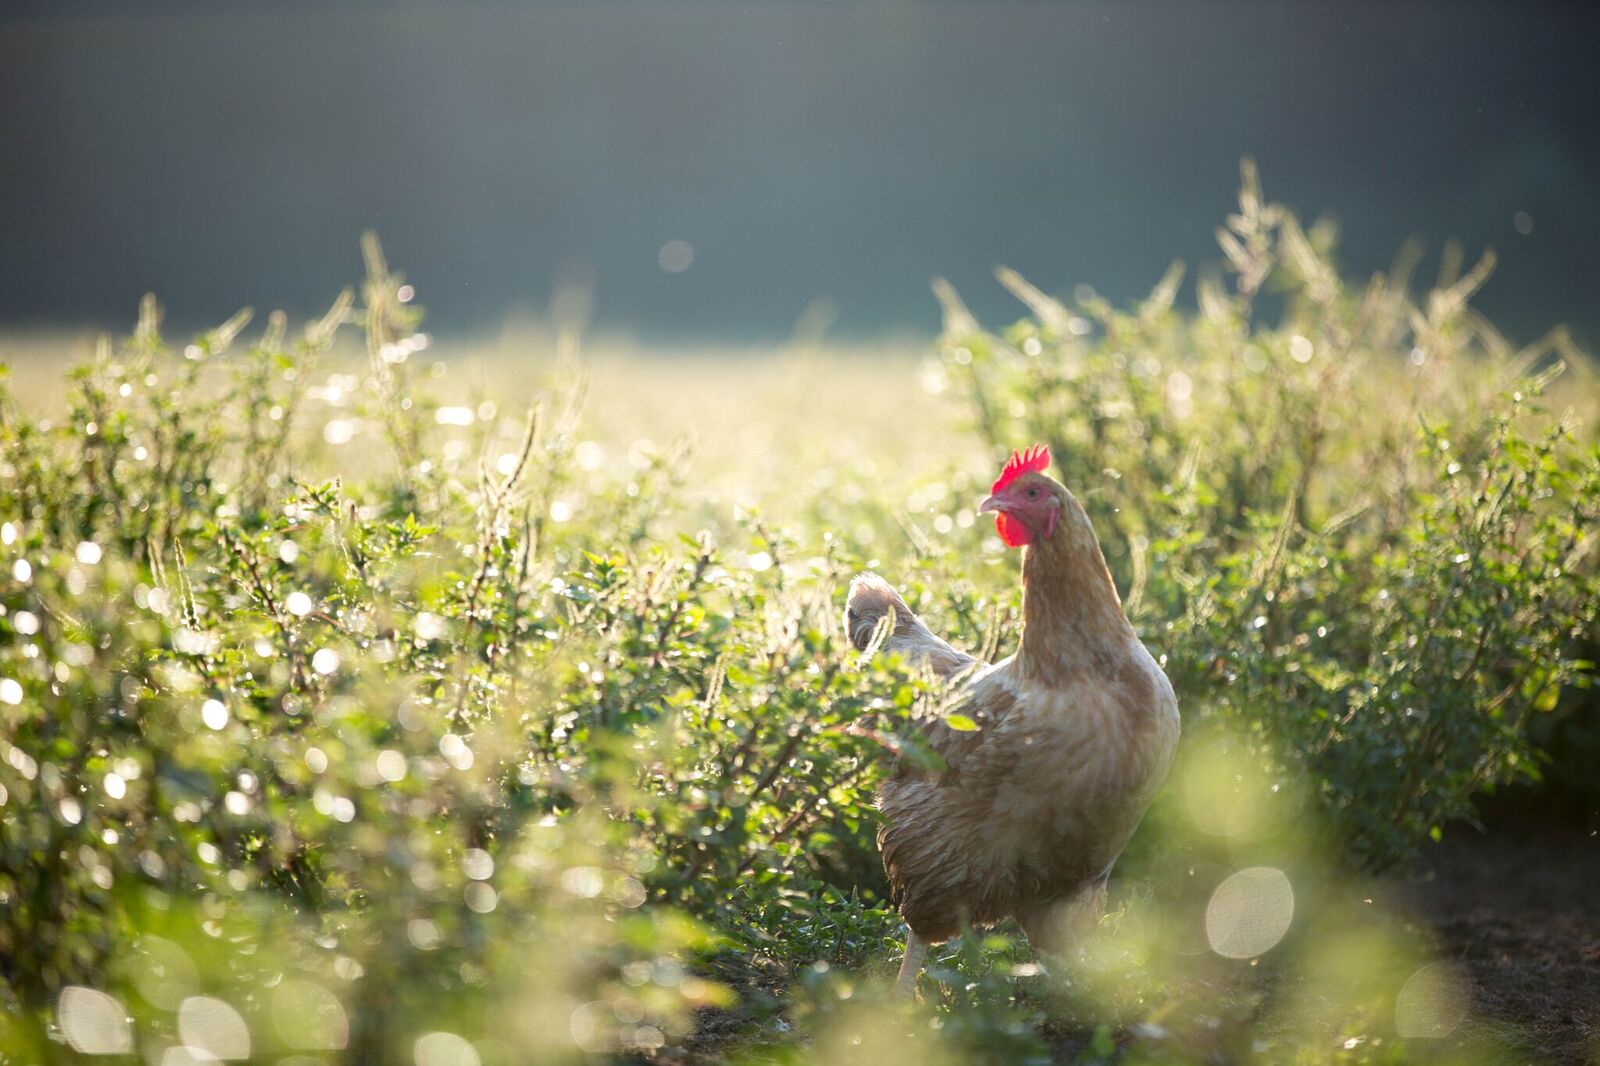 pastured chicken eggs and meat are produced by our pastured poultry